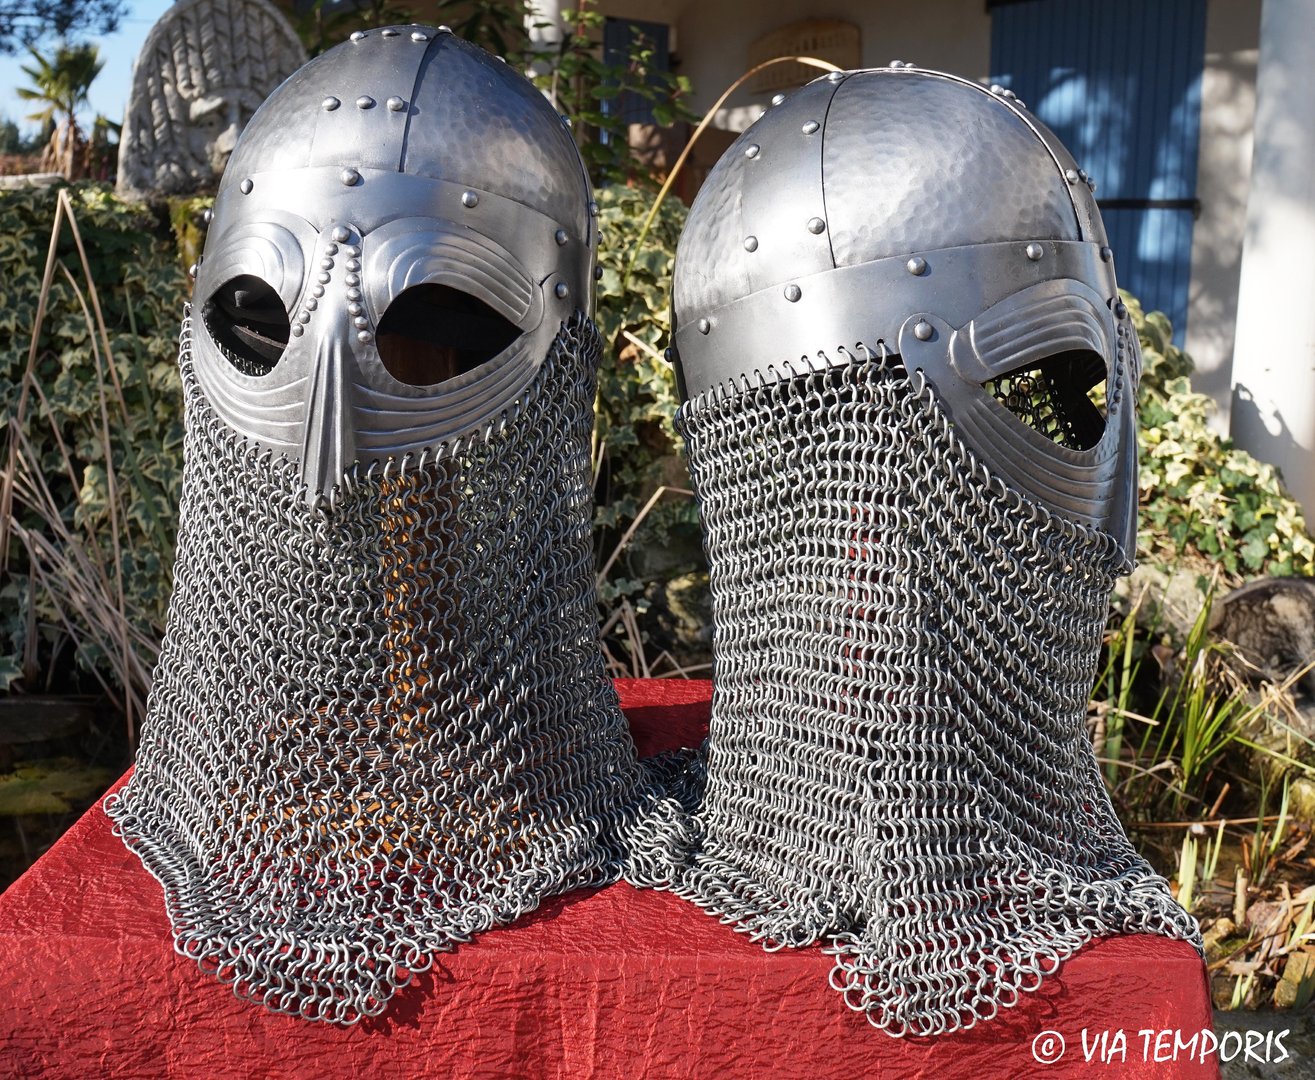 VIKING HELMET WITH EYE GUARD AND CHAINMAIL NECK PROTECTION